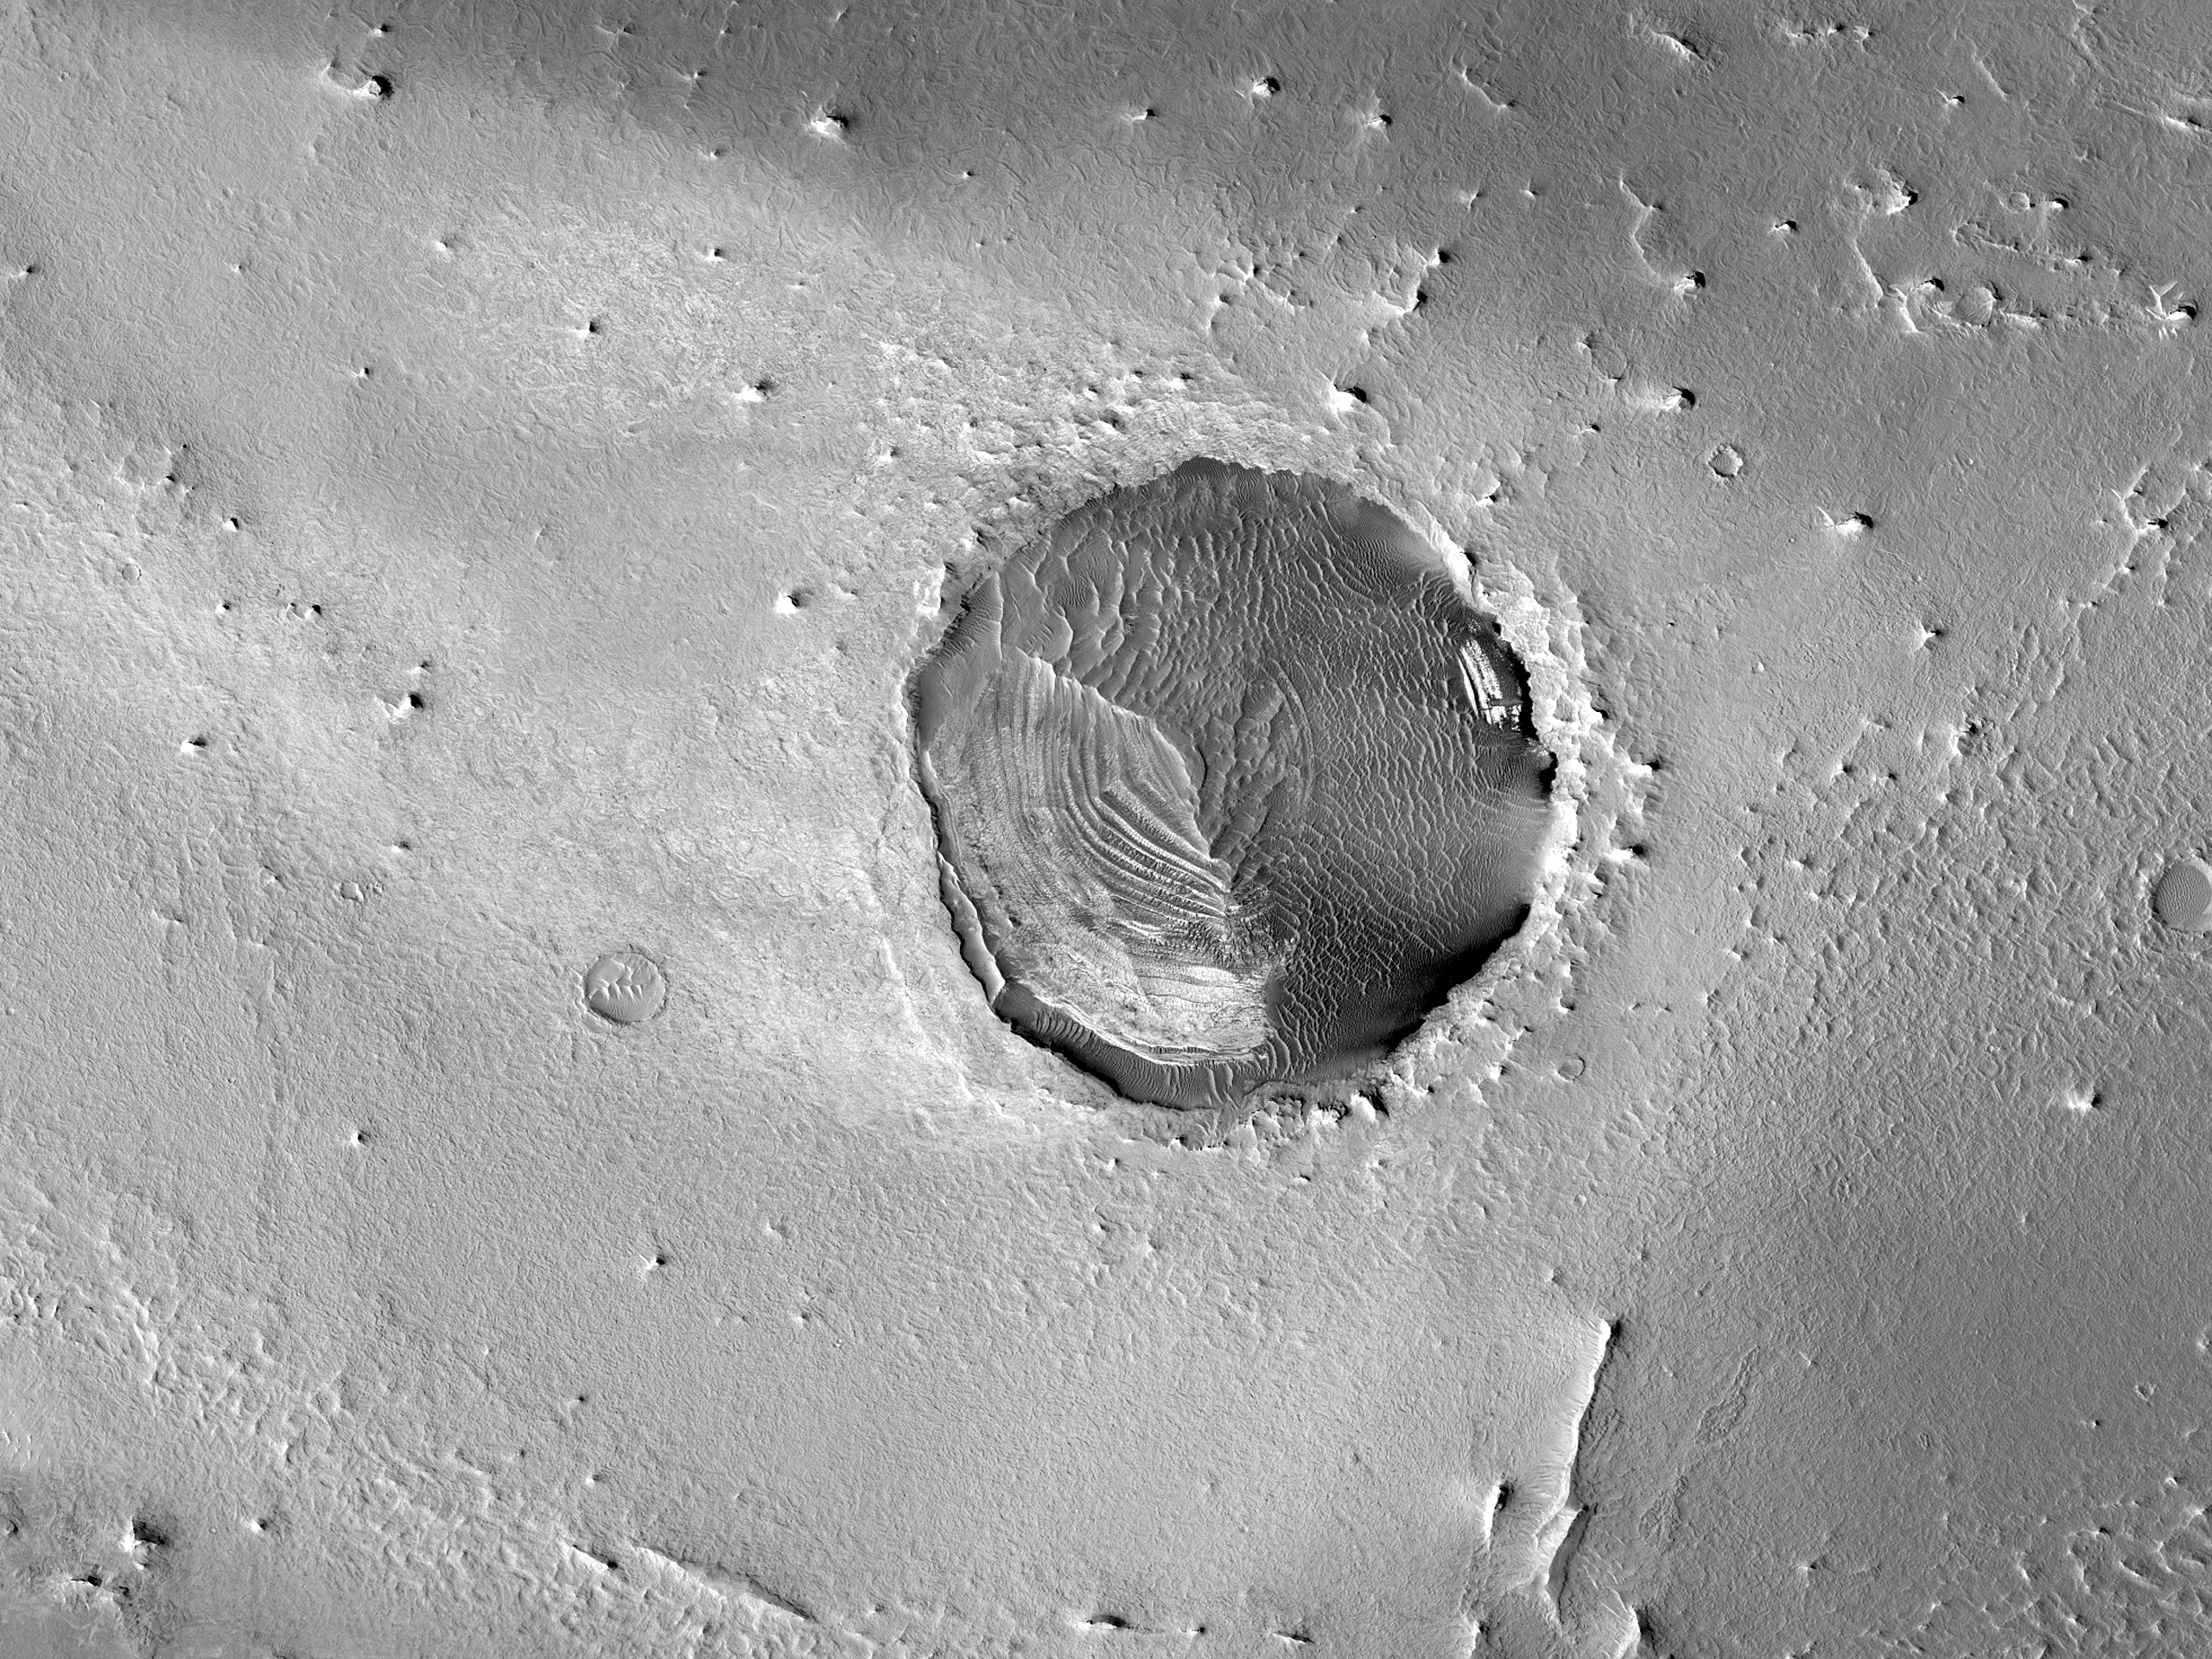 Exposed Layering within a Meridiani Planum Crater